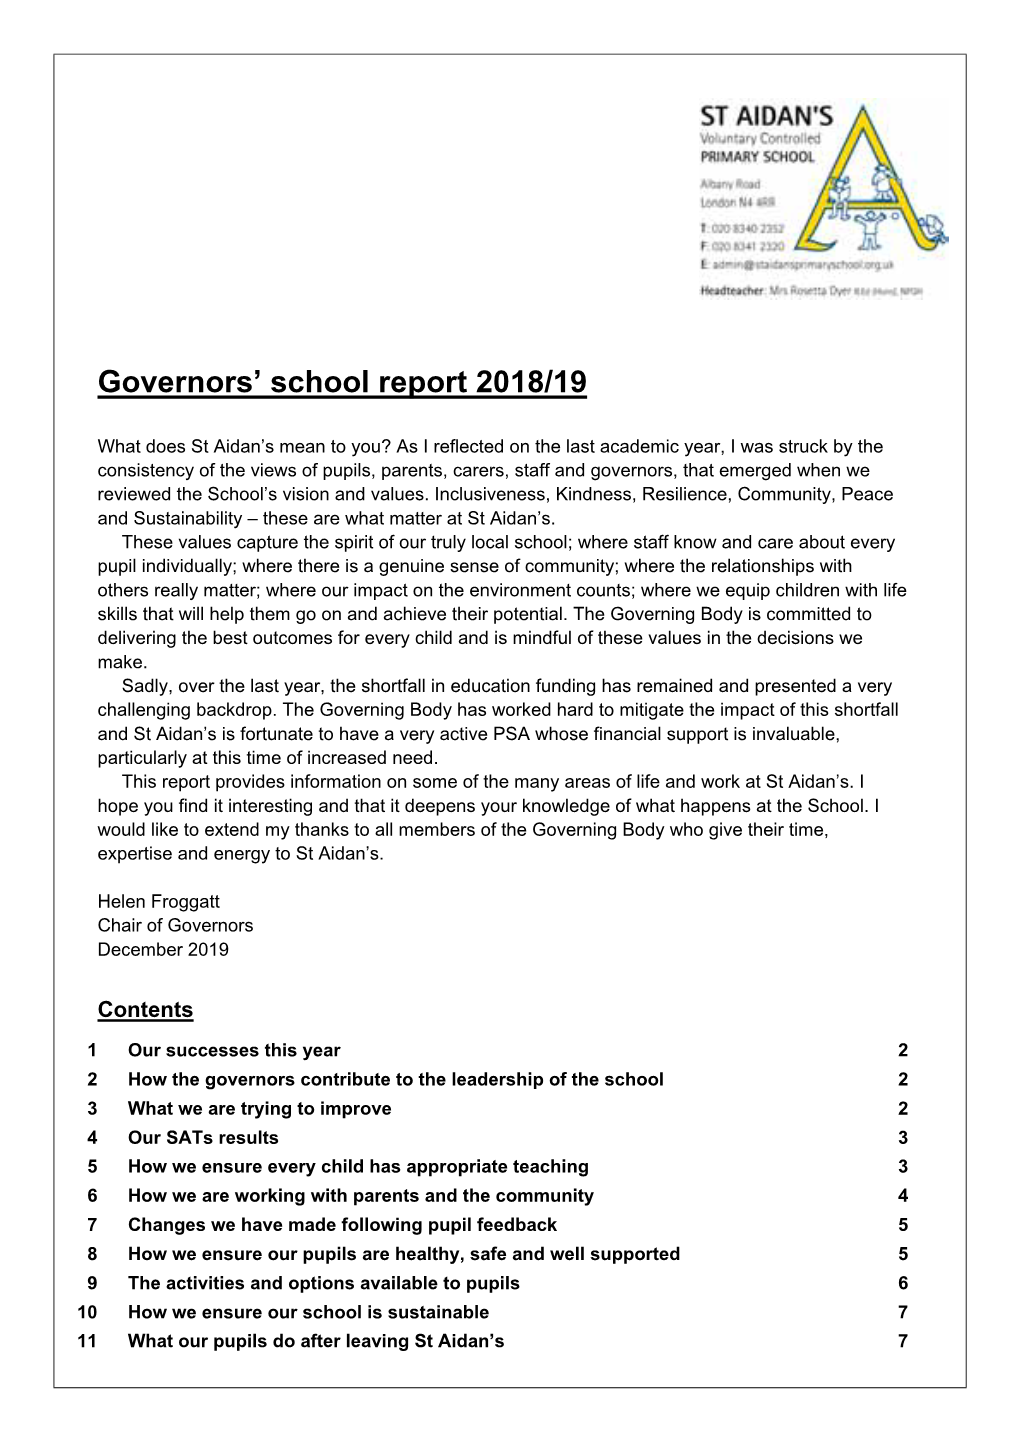 Governor Report 2018-19